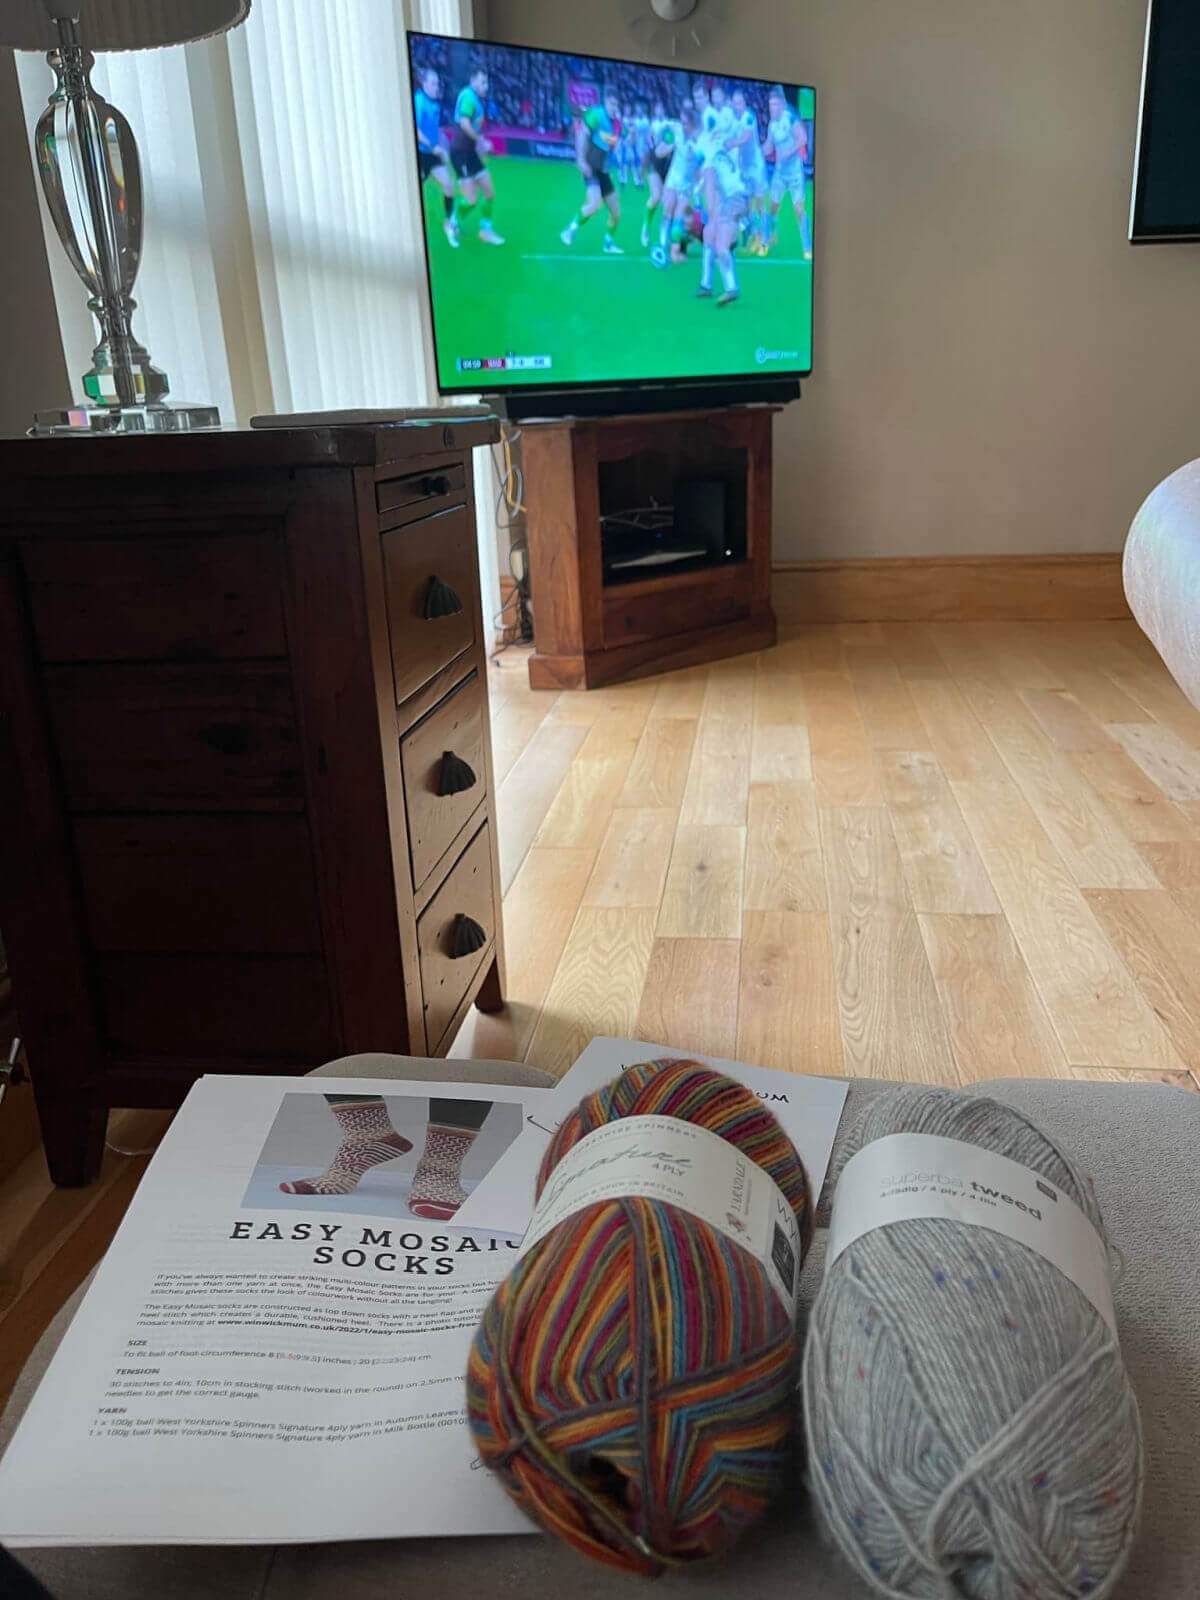 Two balls of yarn are sitting on an Easy Mosaic Socks knitting pattern. In the background is a TV showing a rugby match